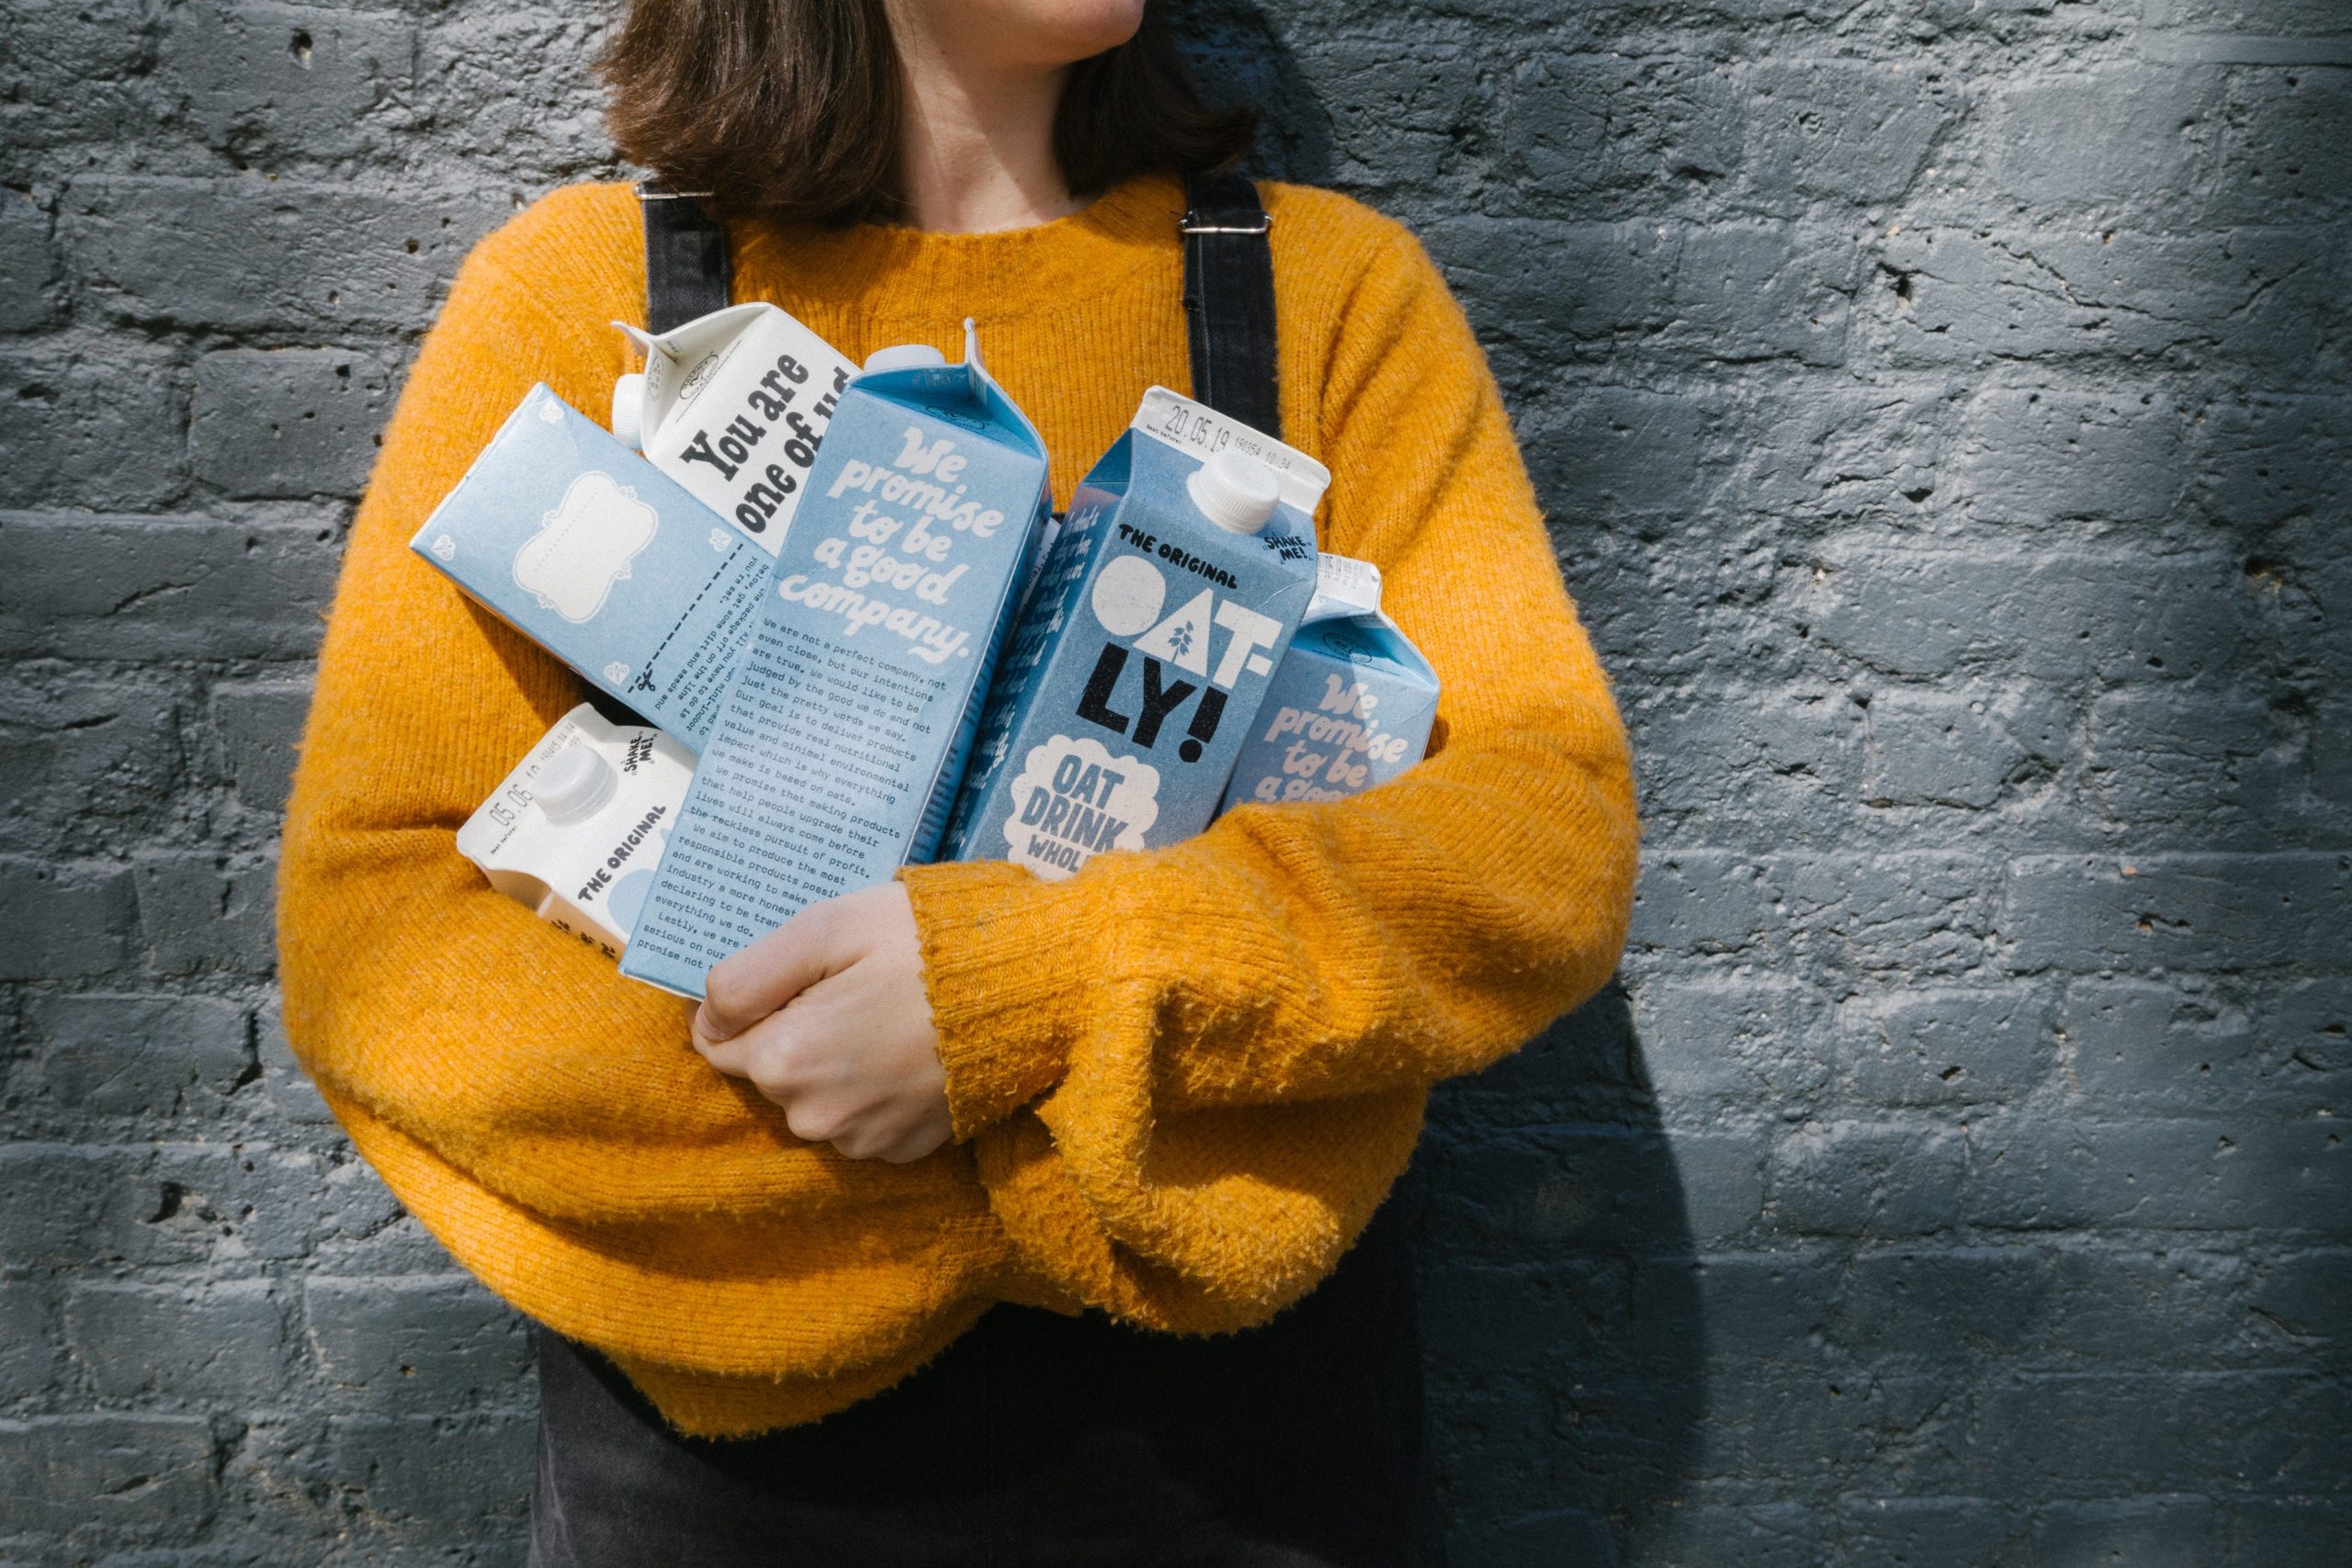 A woman in a yellow sweater holds a half-dozen blue-and-white Oatly cartons